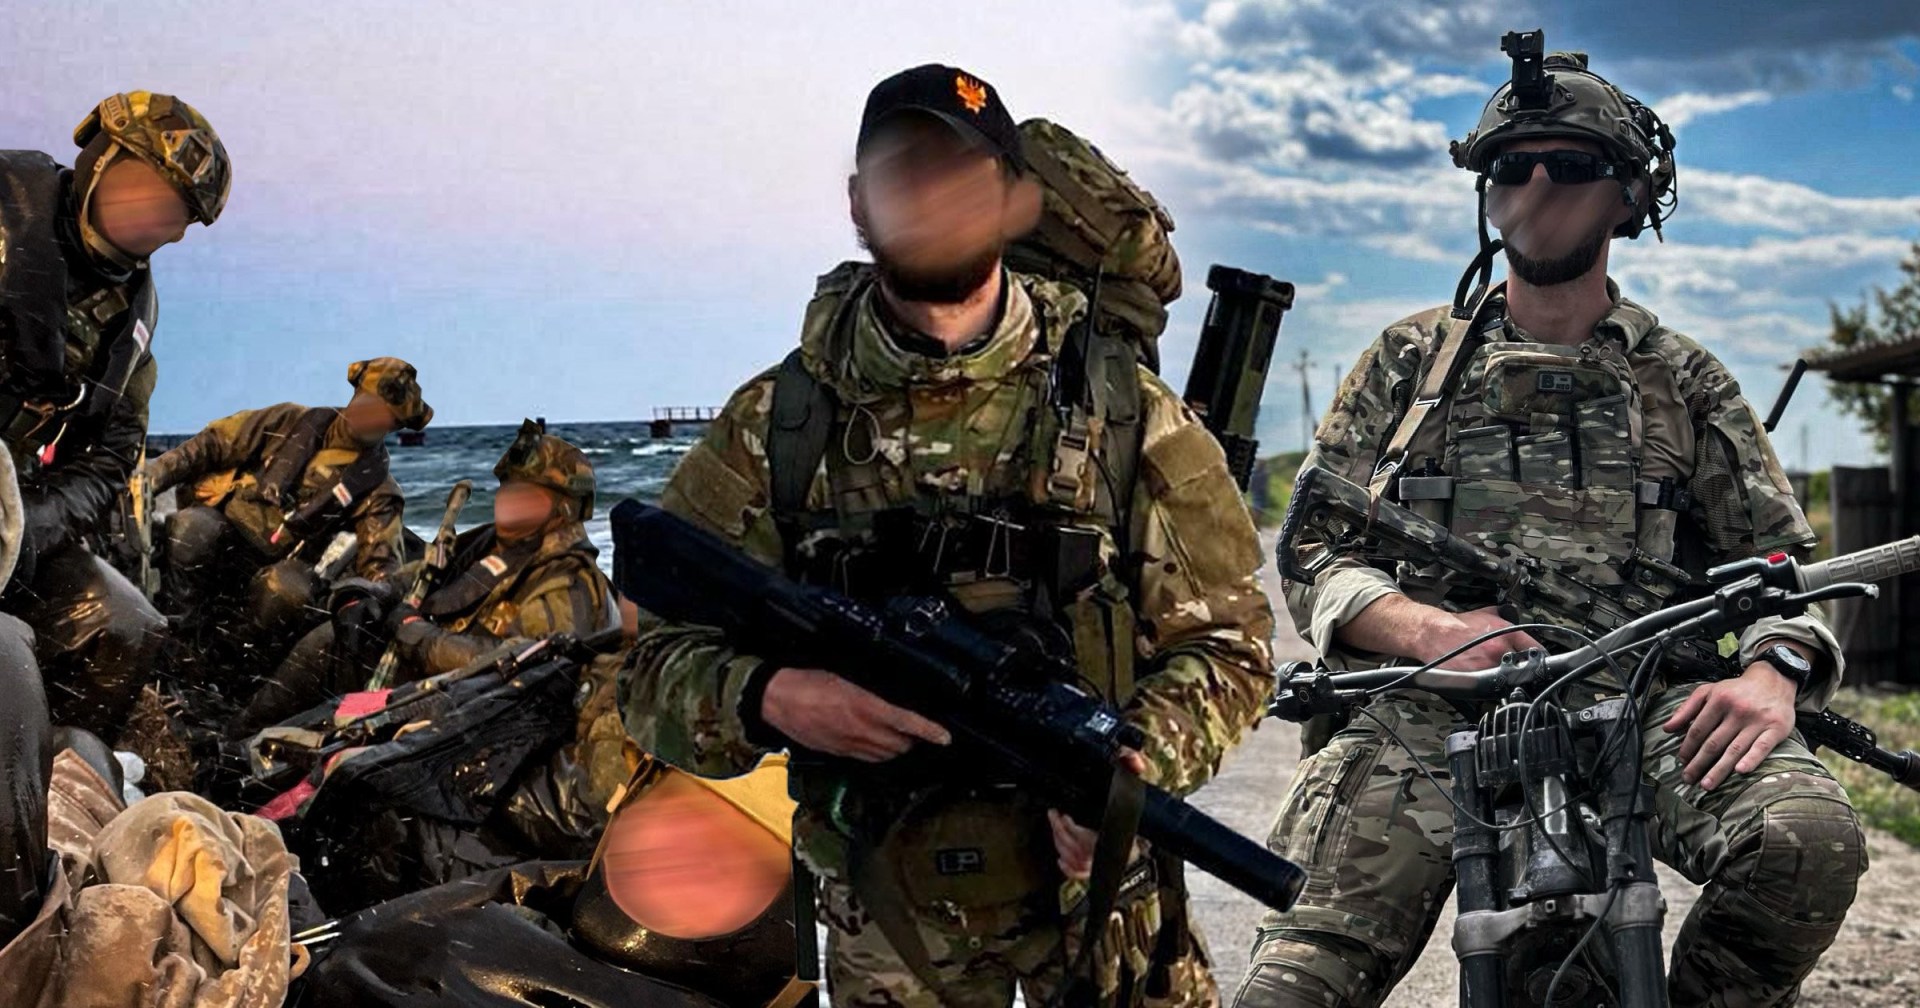 inside ukraine shadow warriors' daring missions within sights of russian guns